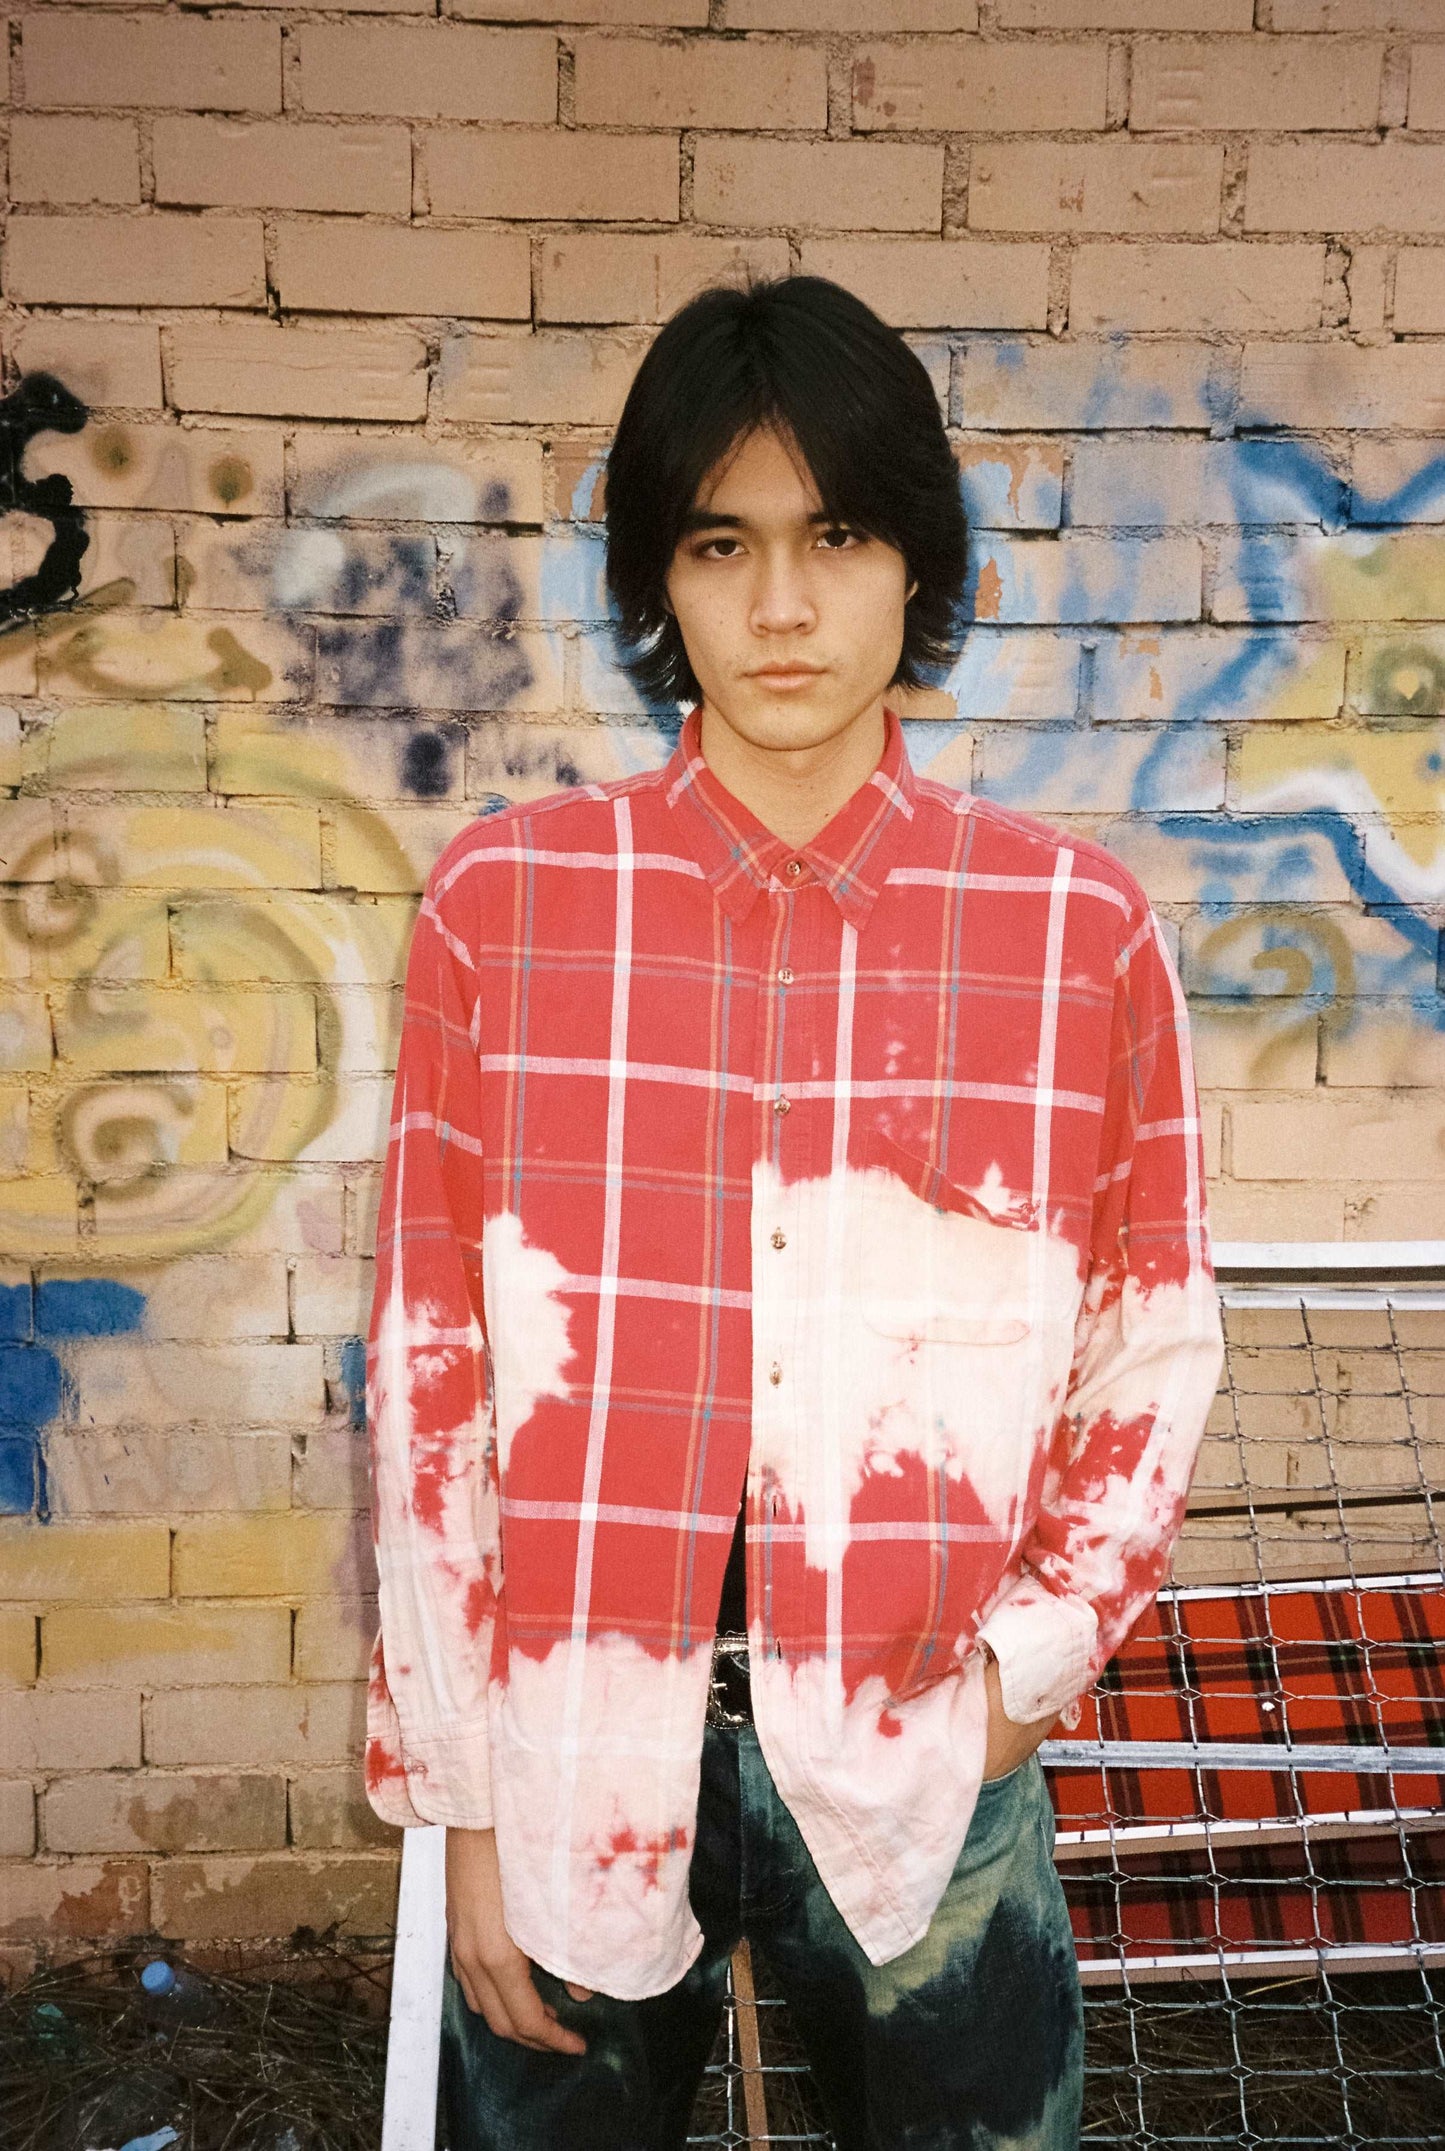 100% cotton vintage shirt with red check that has been hand-dyed with lighter pink colours throughout garment